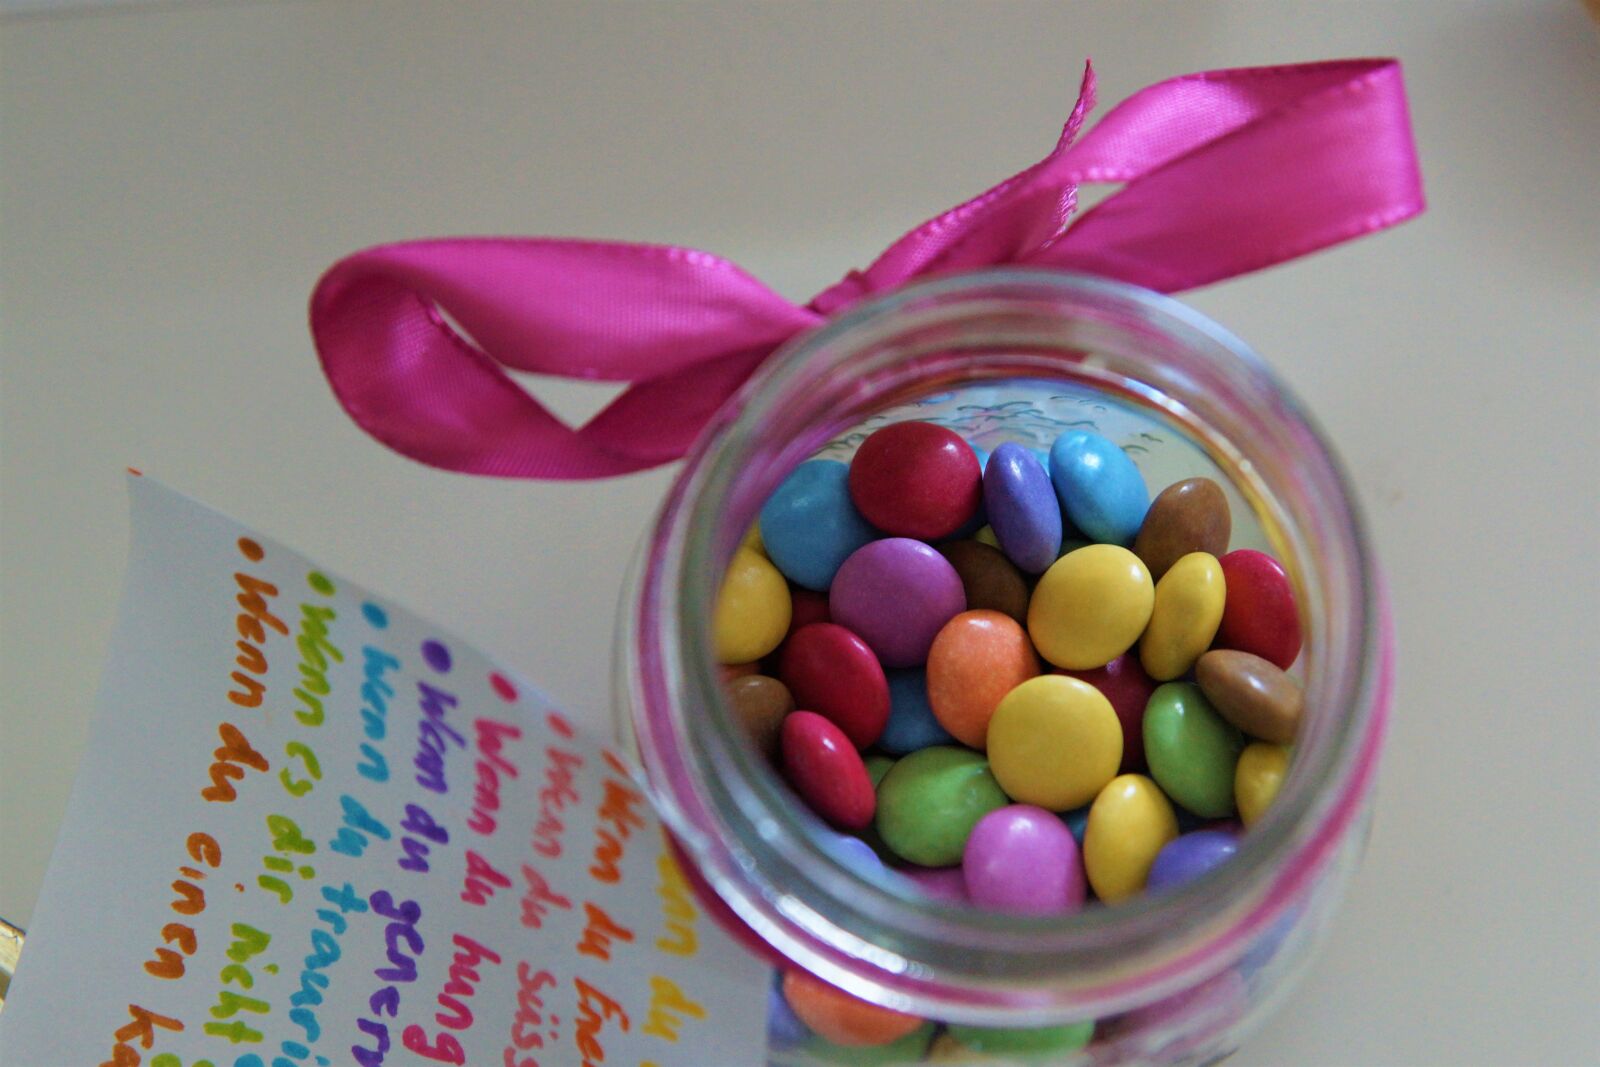 24-70mm F2.8 sample photo. Smarties, colorful, sweetness photography